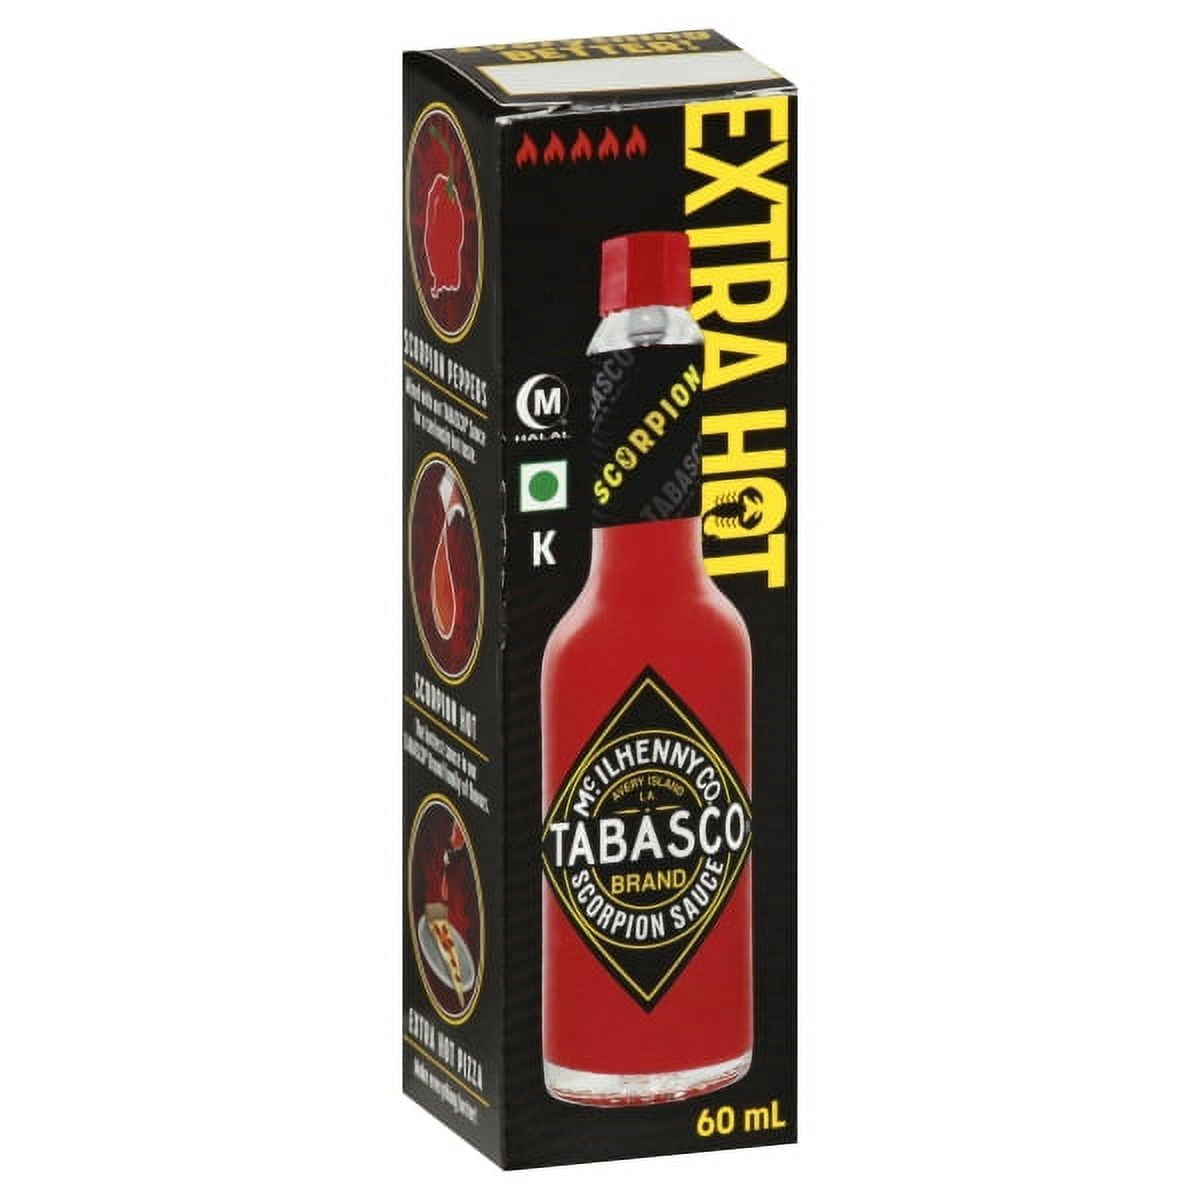 Tabasco Scorpion Sauce Review (Seriously Spicy) Pepper Geek